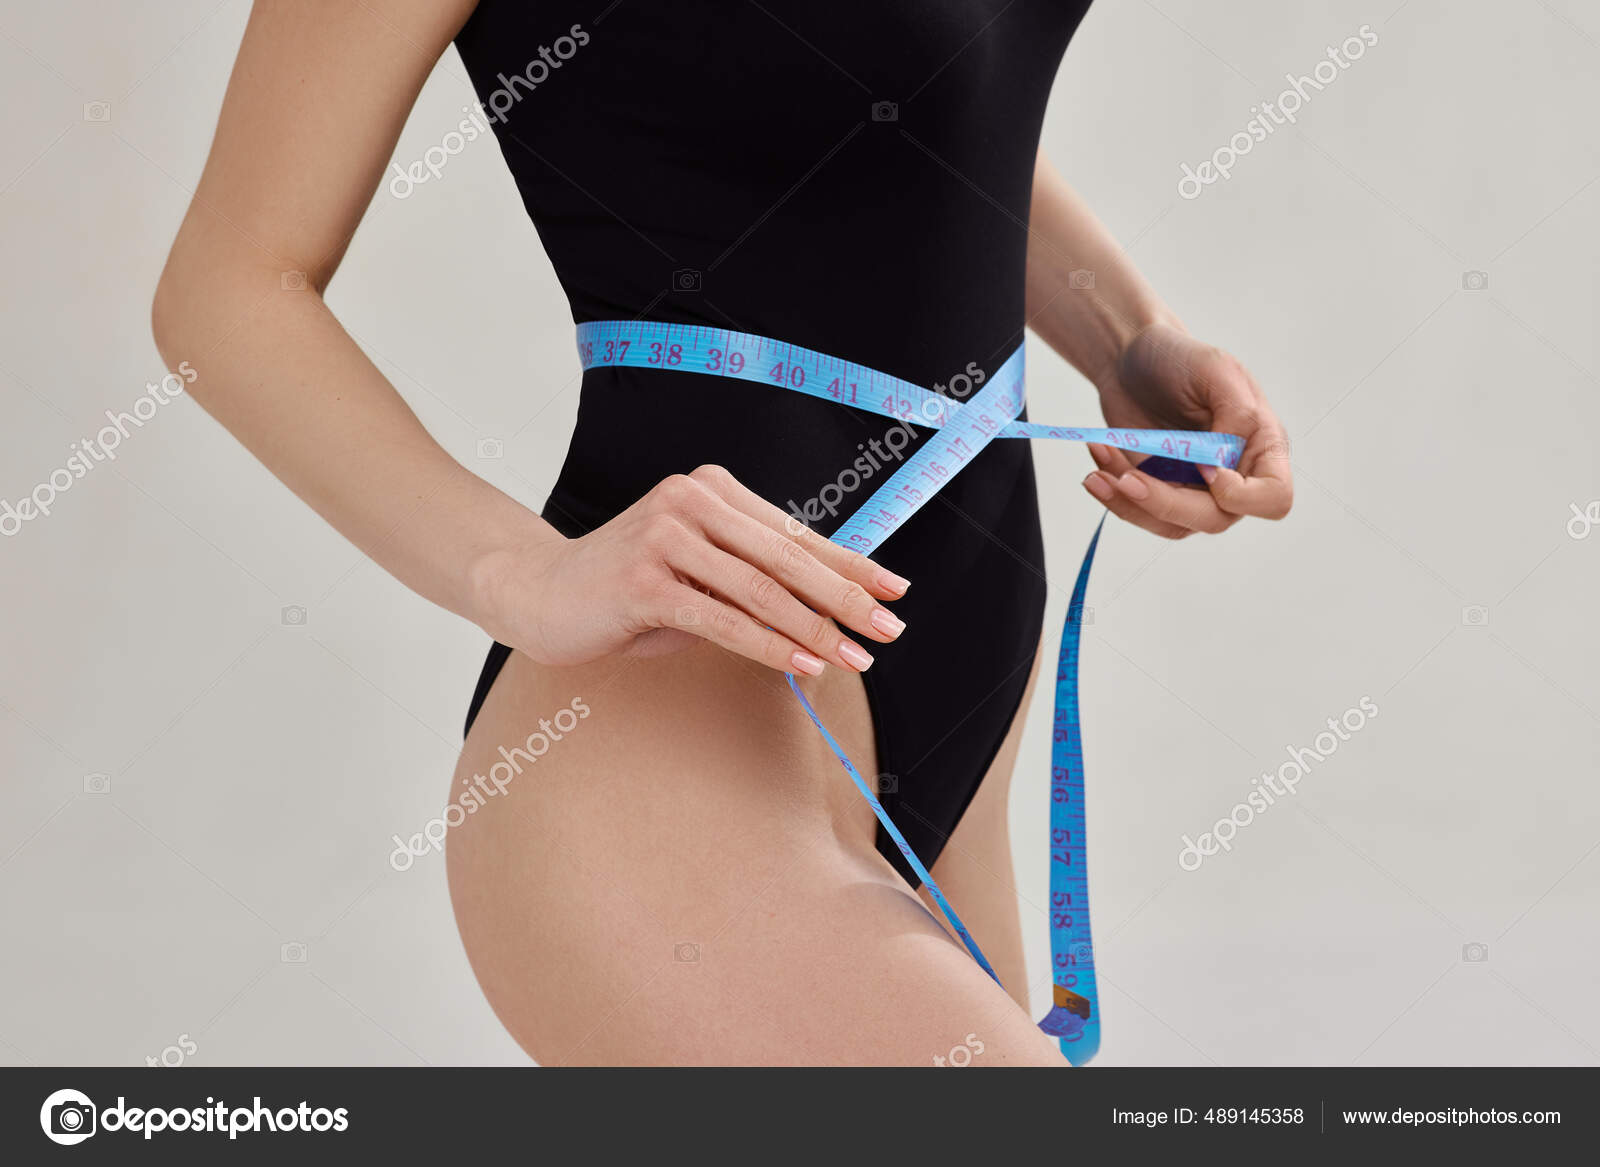 Woman Body with a Tape Measure Measuring Her Waist Stock Photo